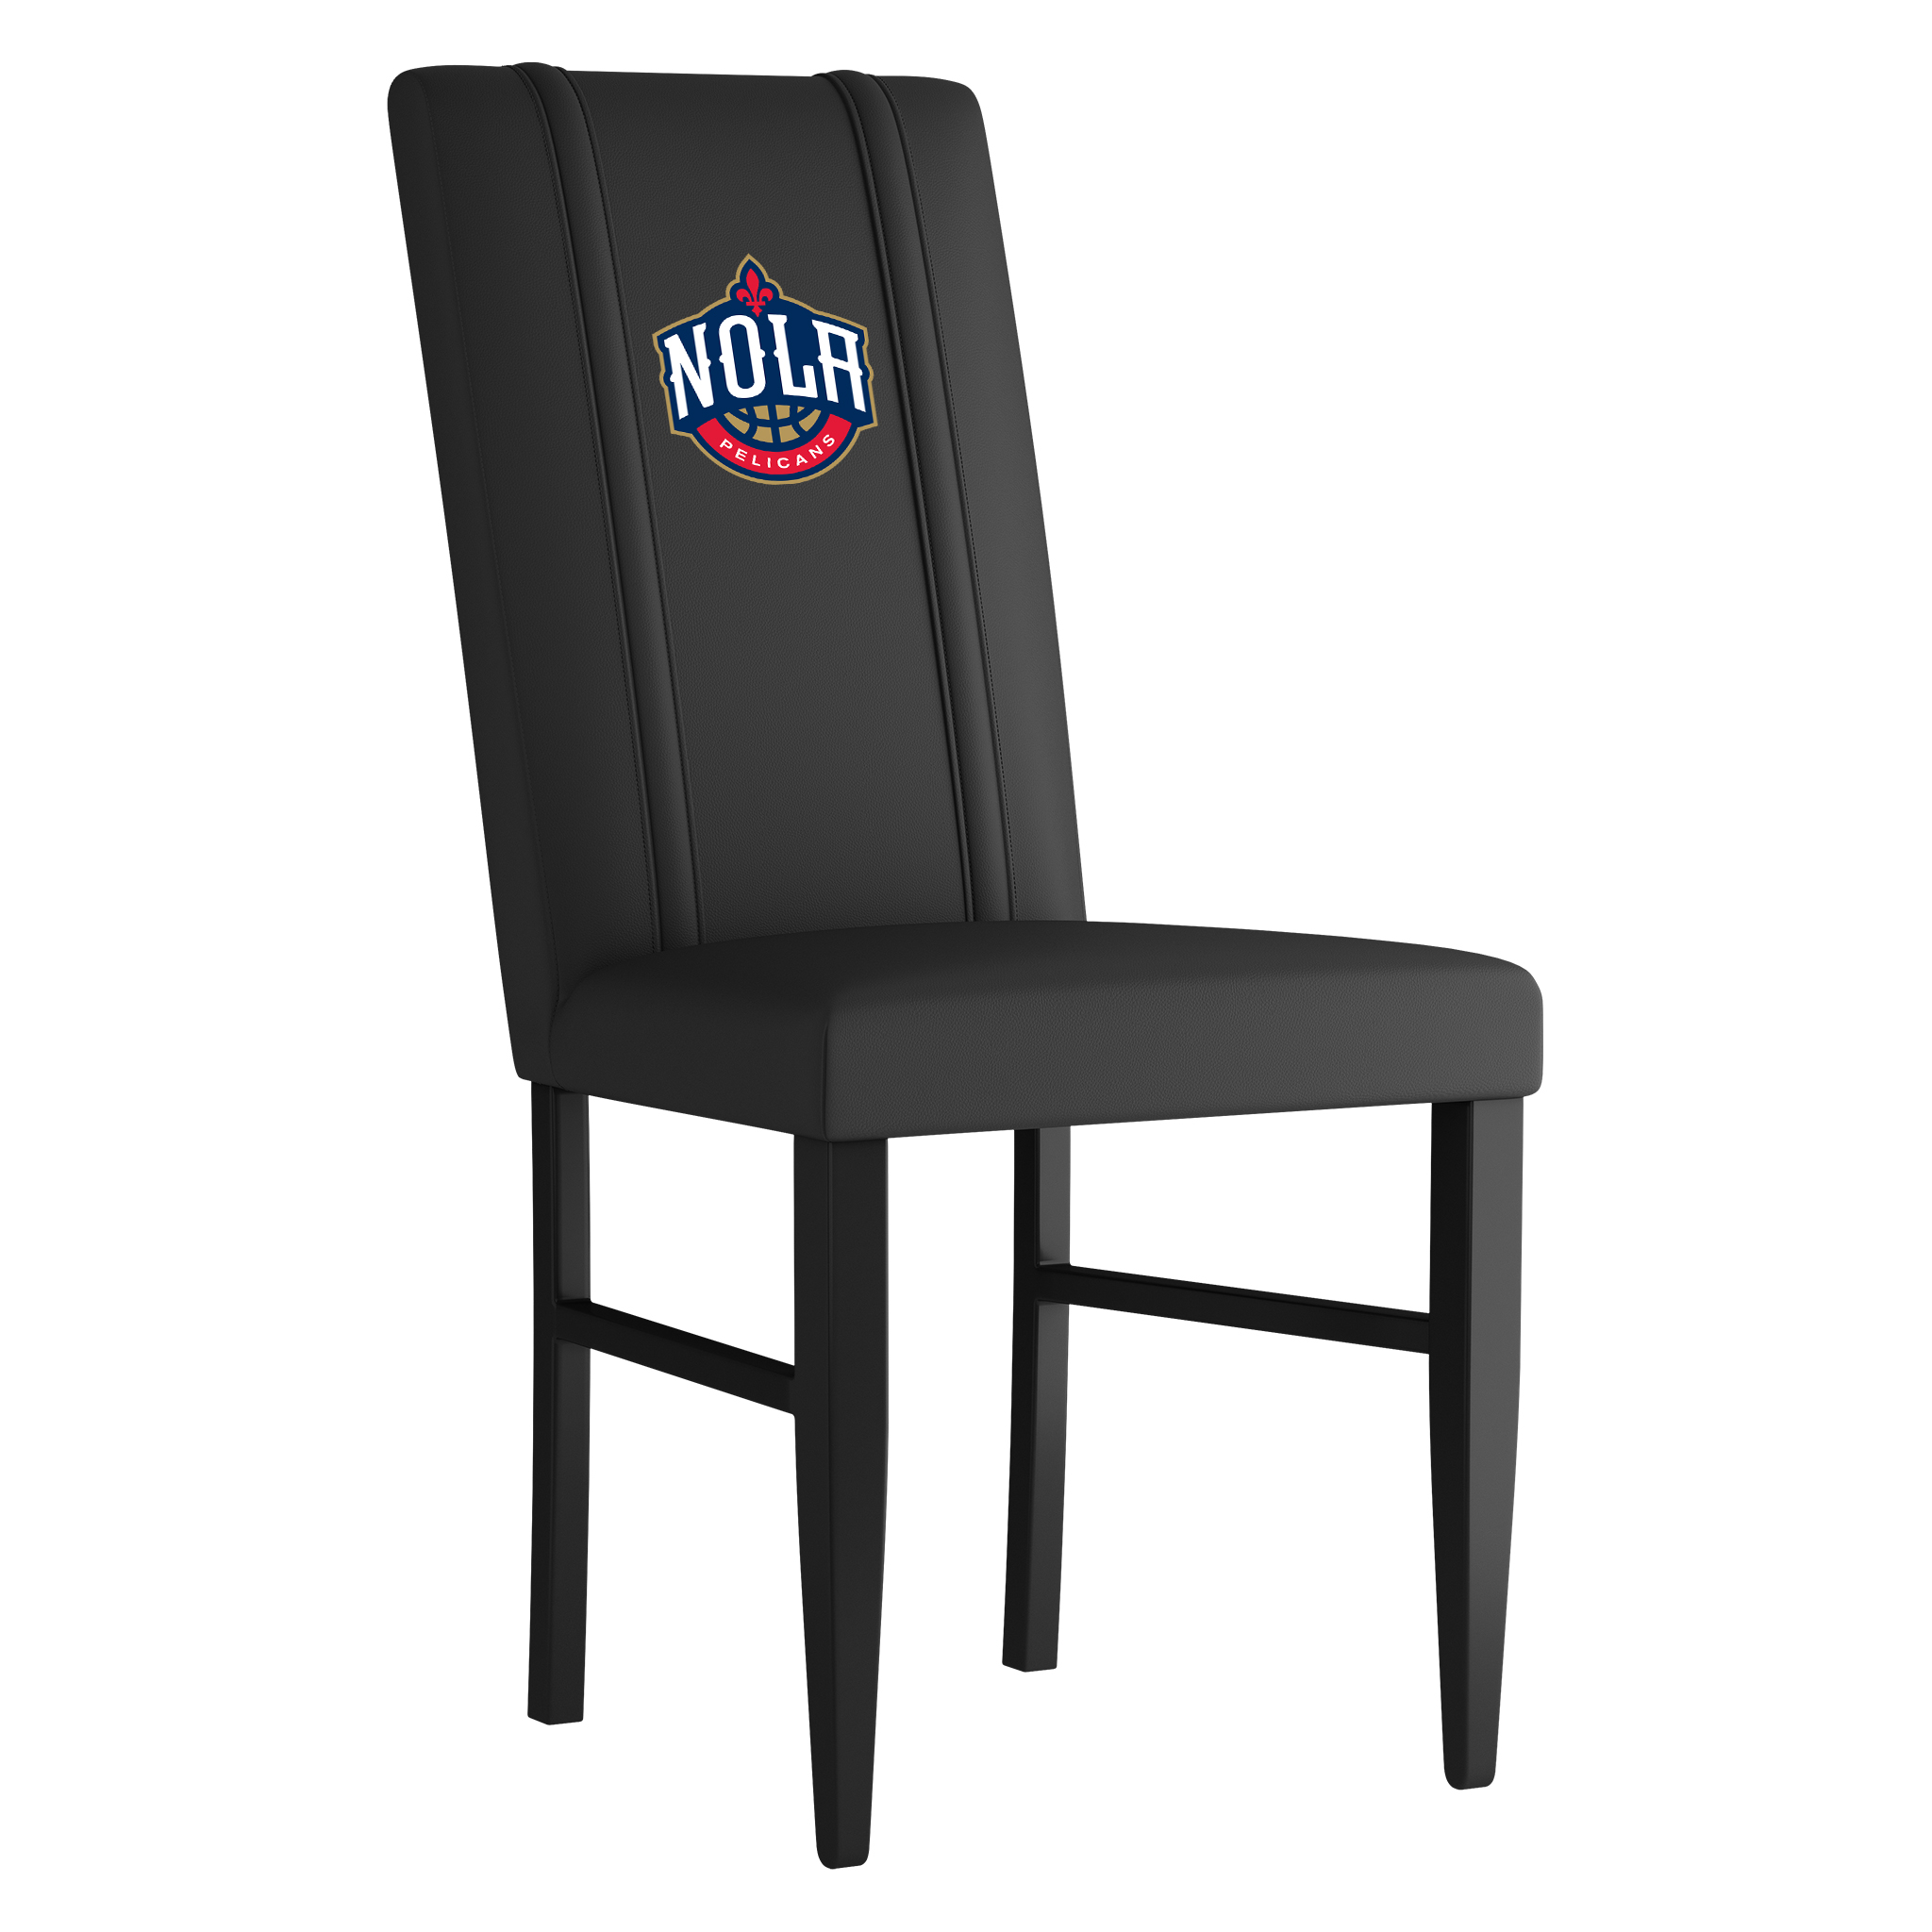 New Orleans Pelicans Side Chair 2000 With New Orleans Pelicans Nola